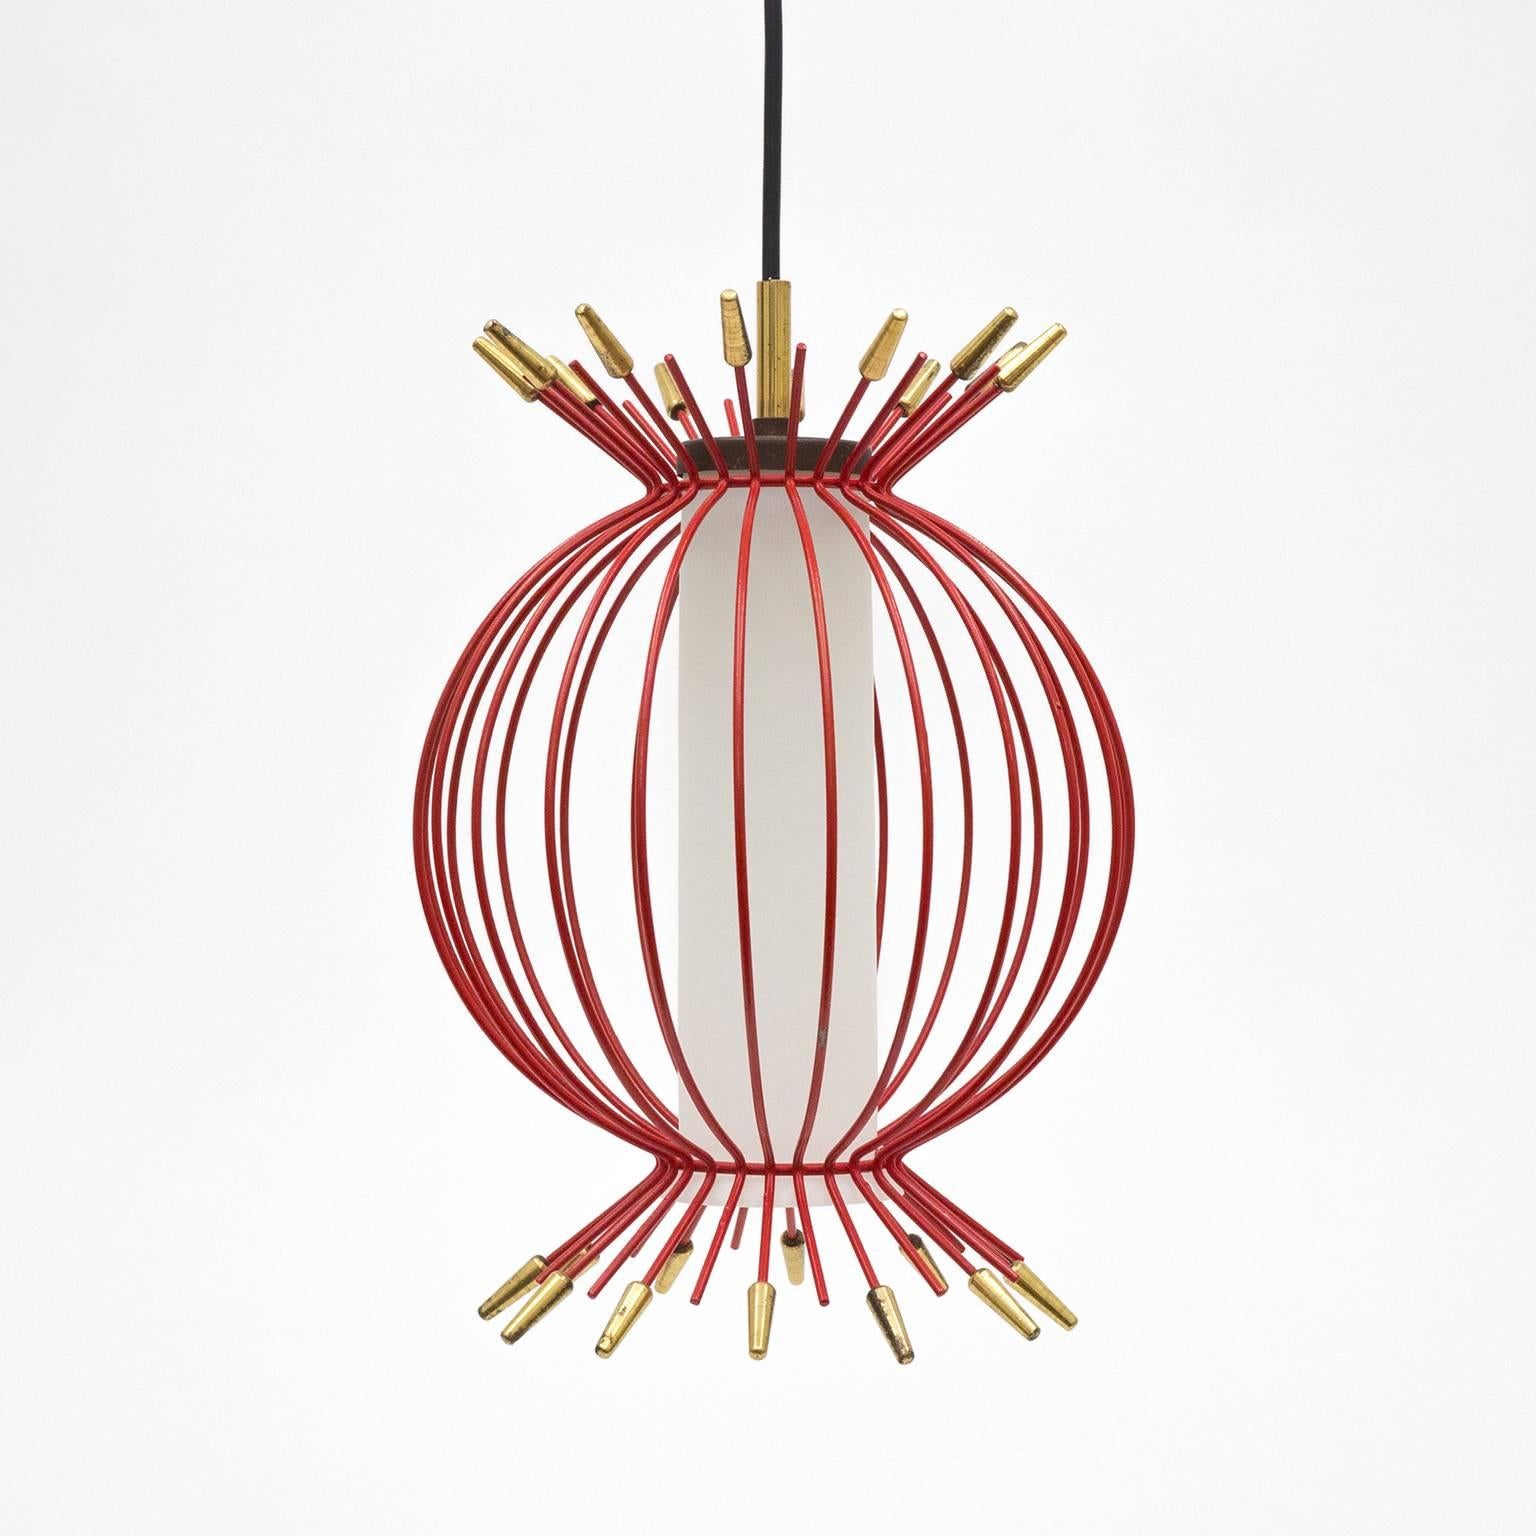 Delightful Mid-Century cage pendant, circa 1960. A red lacquered wire cage with brass details sits atop a cased and satiated glass diffuser. Very nice original condition with light loss of paint and a lovely patina on the brass. One E14 socket with